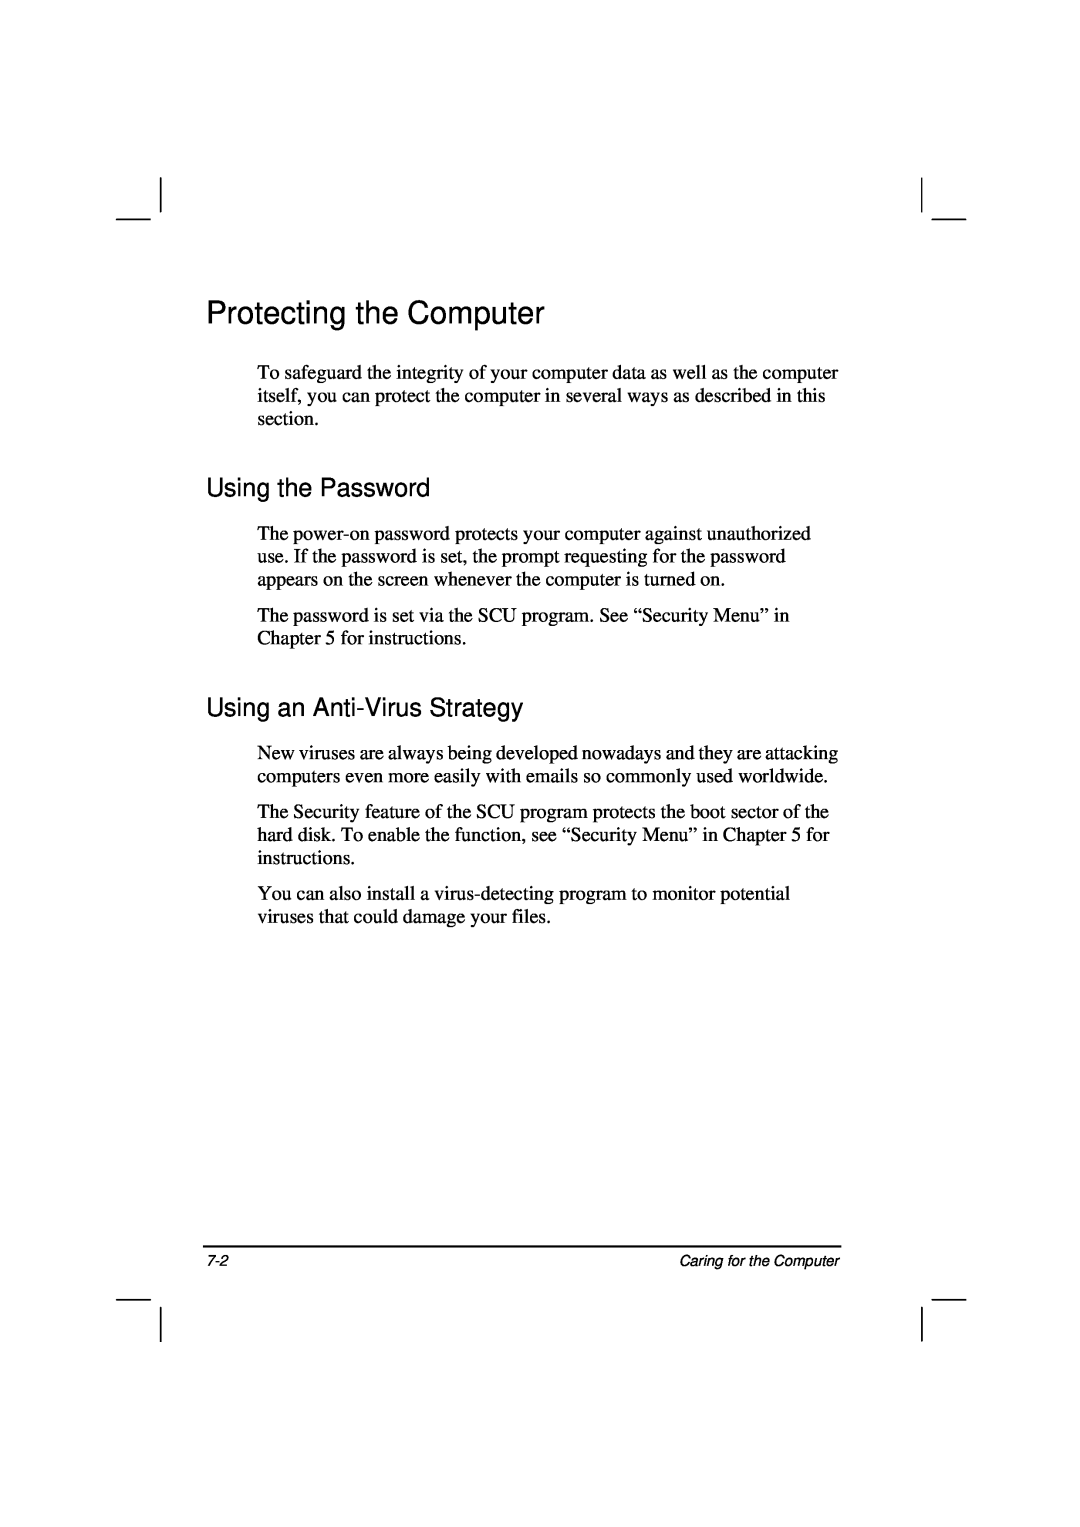 Casio HK1223 owner manual Protecting the Computer, Using the Password, Using an Anti-Virus Strategy 